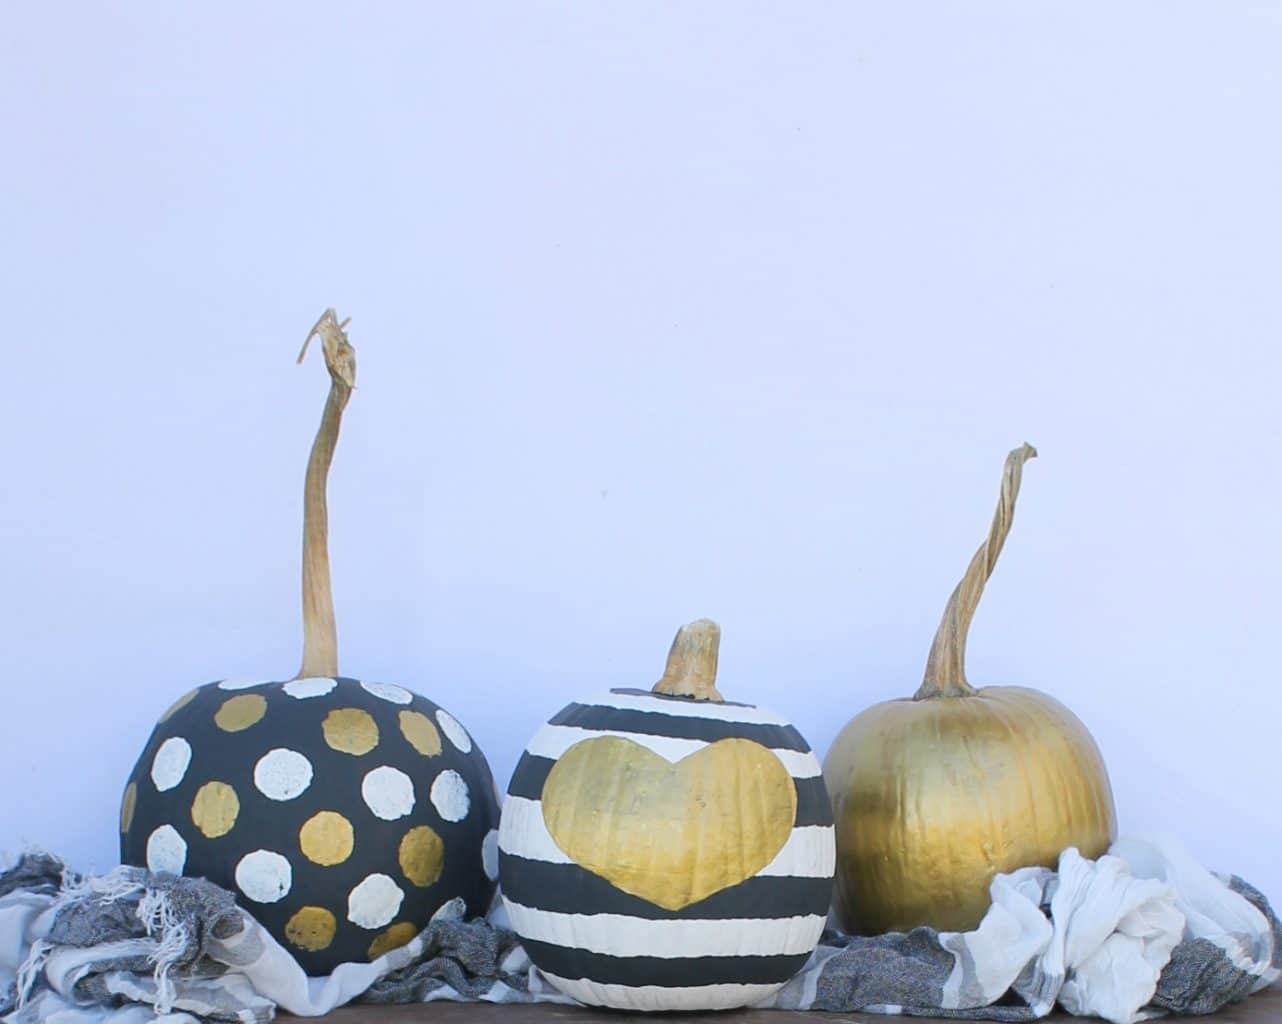 Classy black and gold pumpkins are a fun way to decorate for fall!